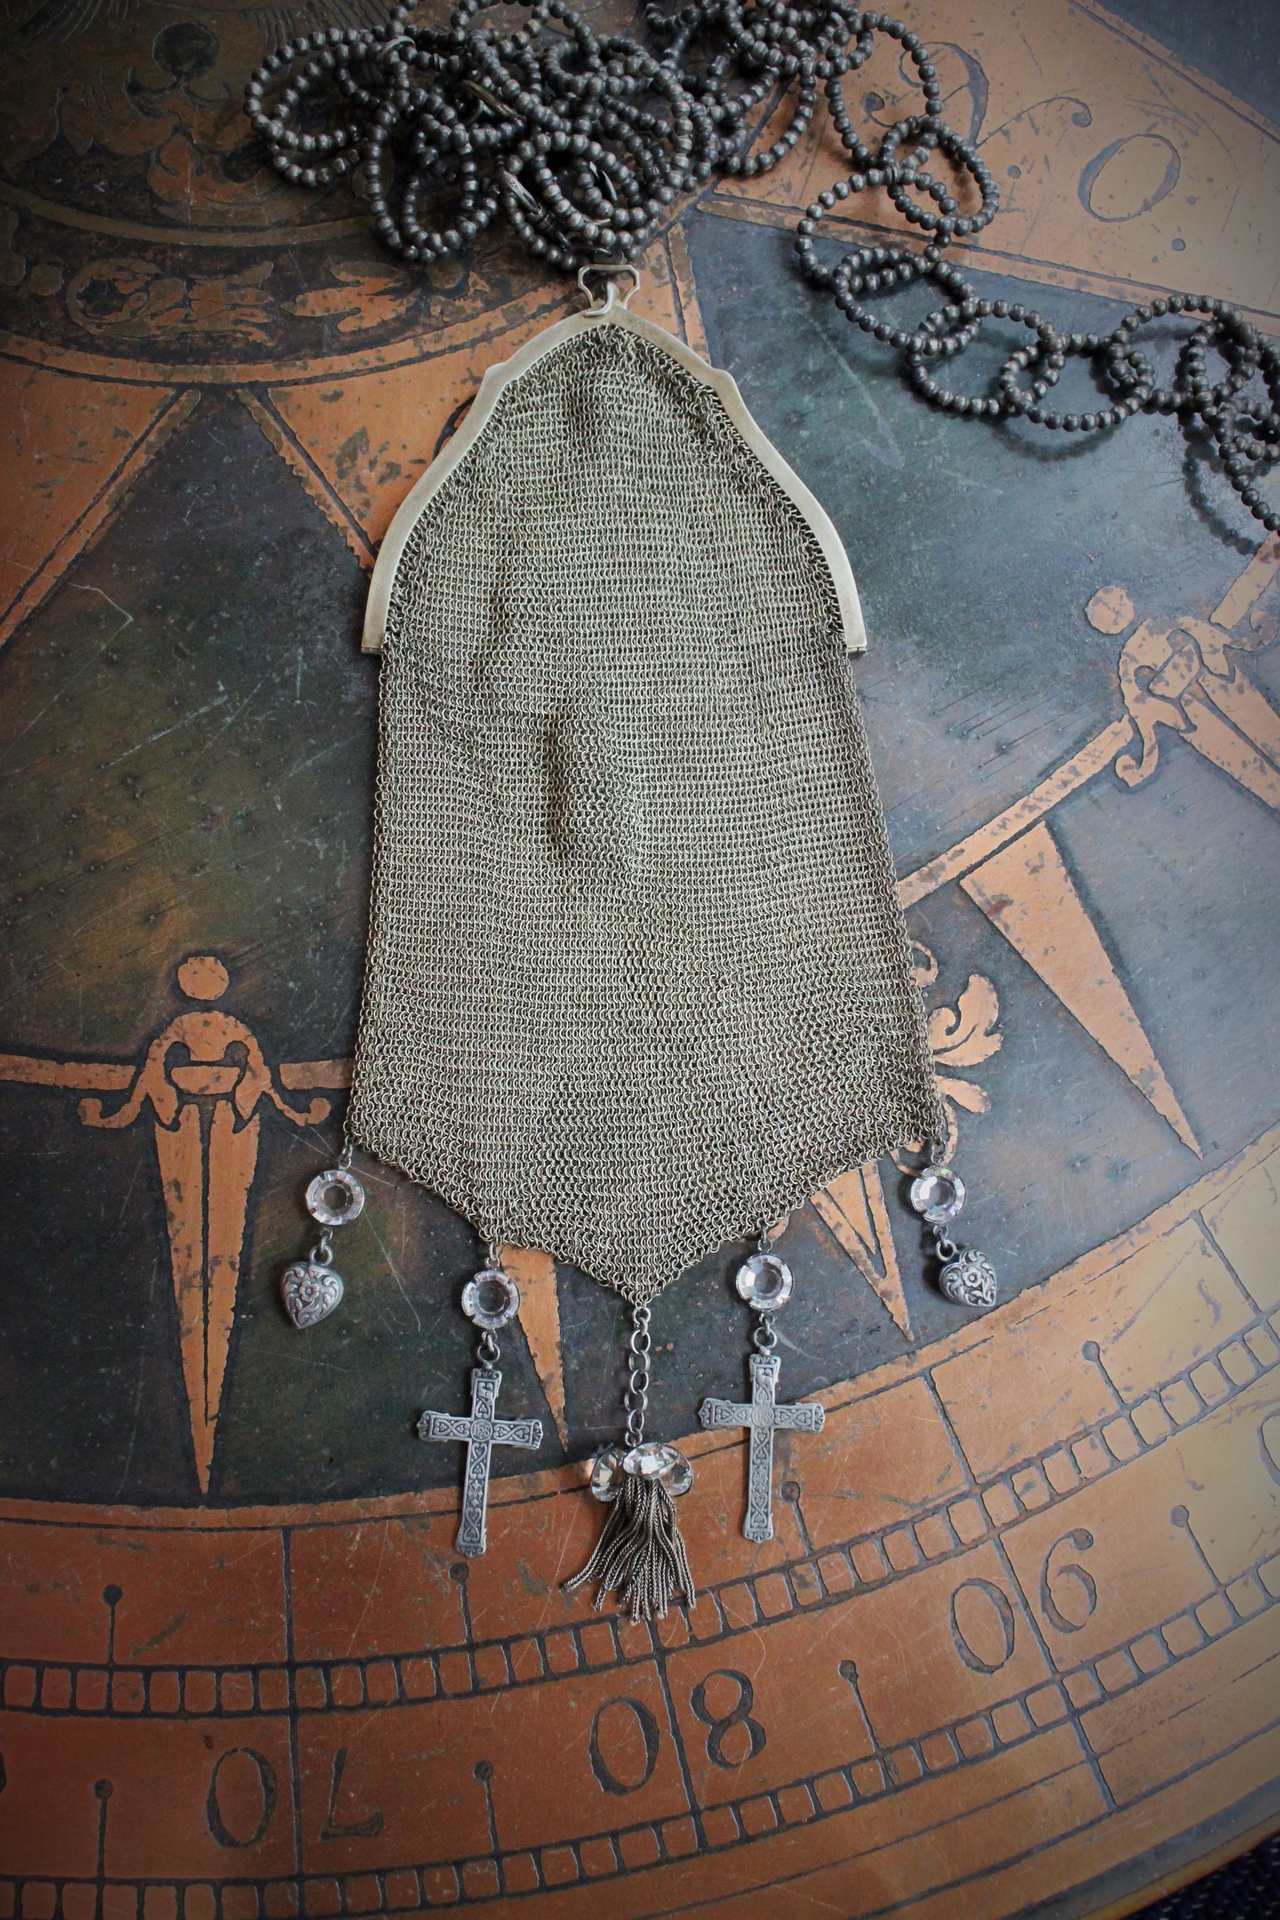 Antique Whiting & Davis Mesh Smart Phone/Essentials Hip Bag with French Crosses, Puffy Heart Drops,AntiqueTassel,Prong Set Faceted Crystals Connectors & Unique Antique Chain